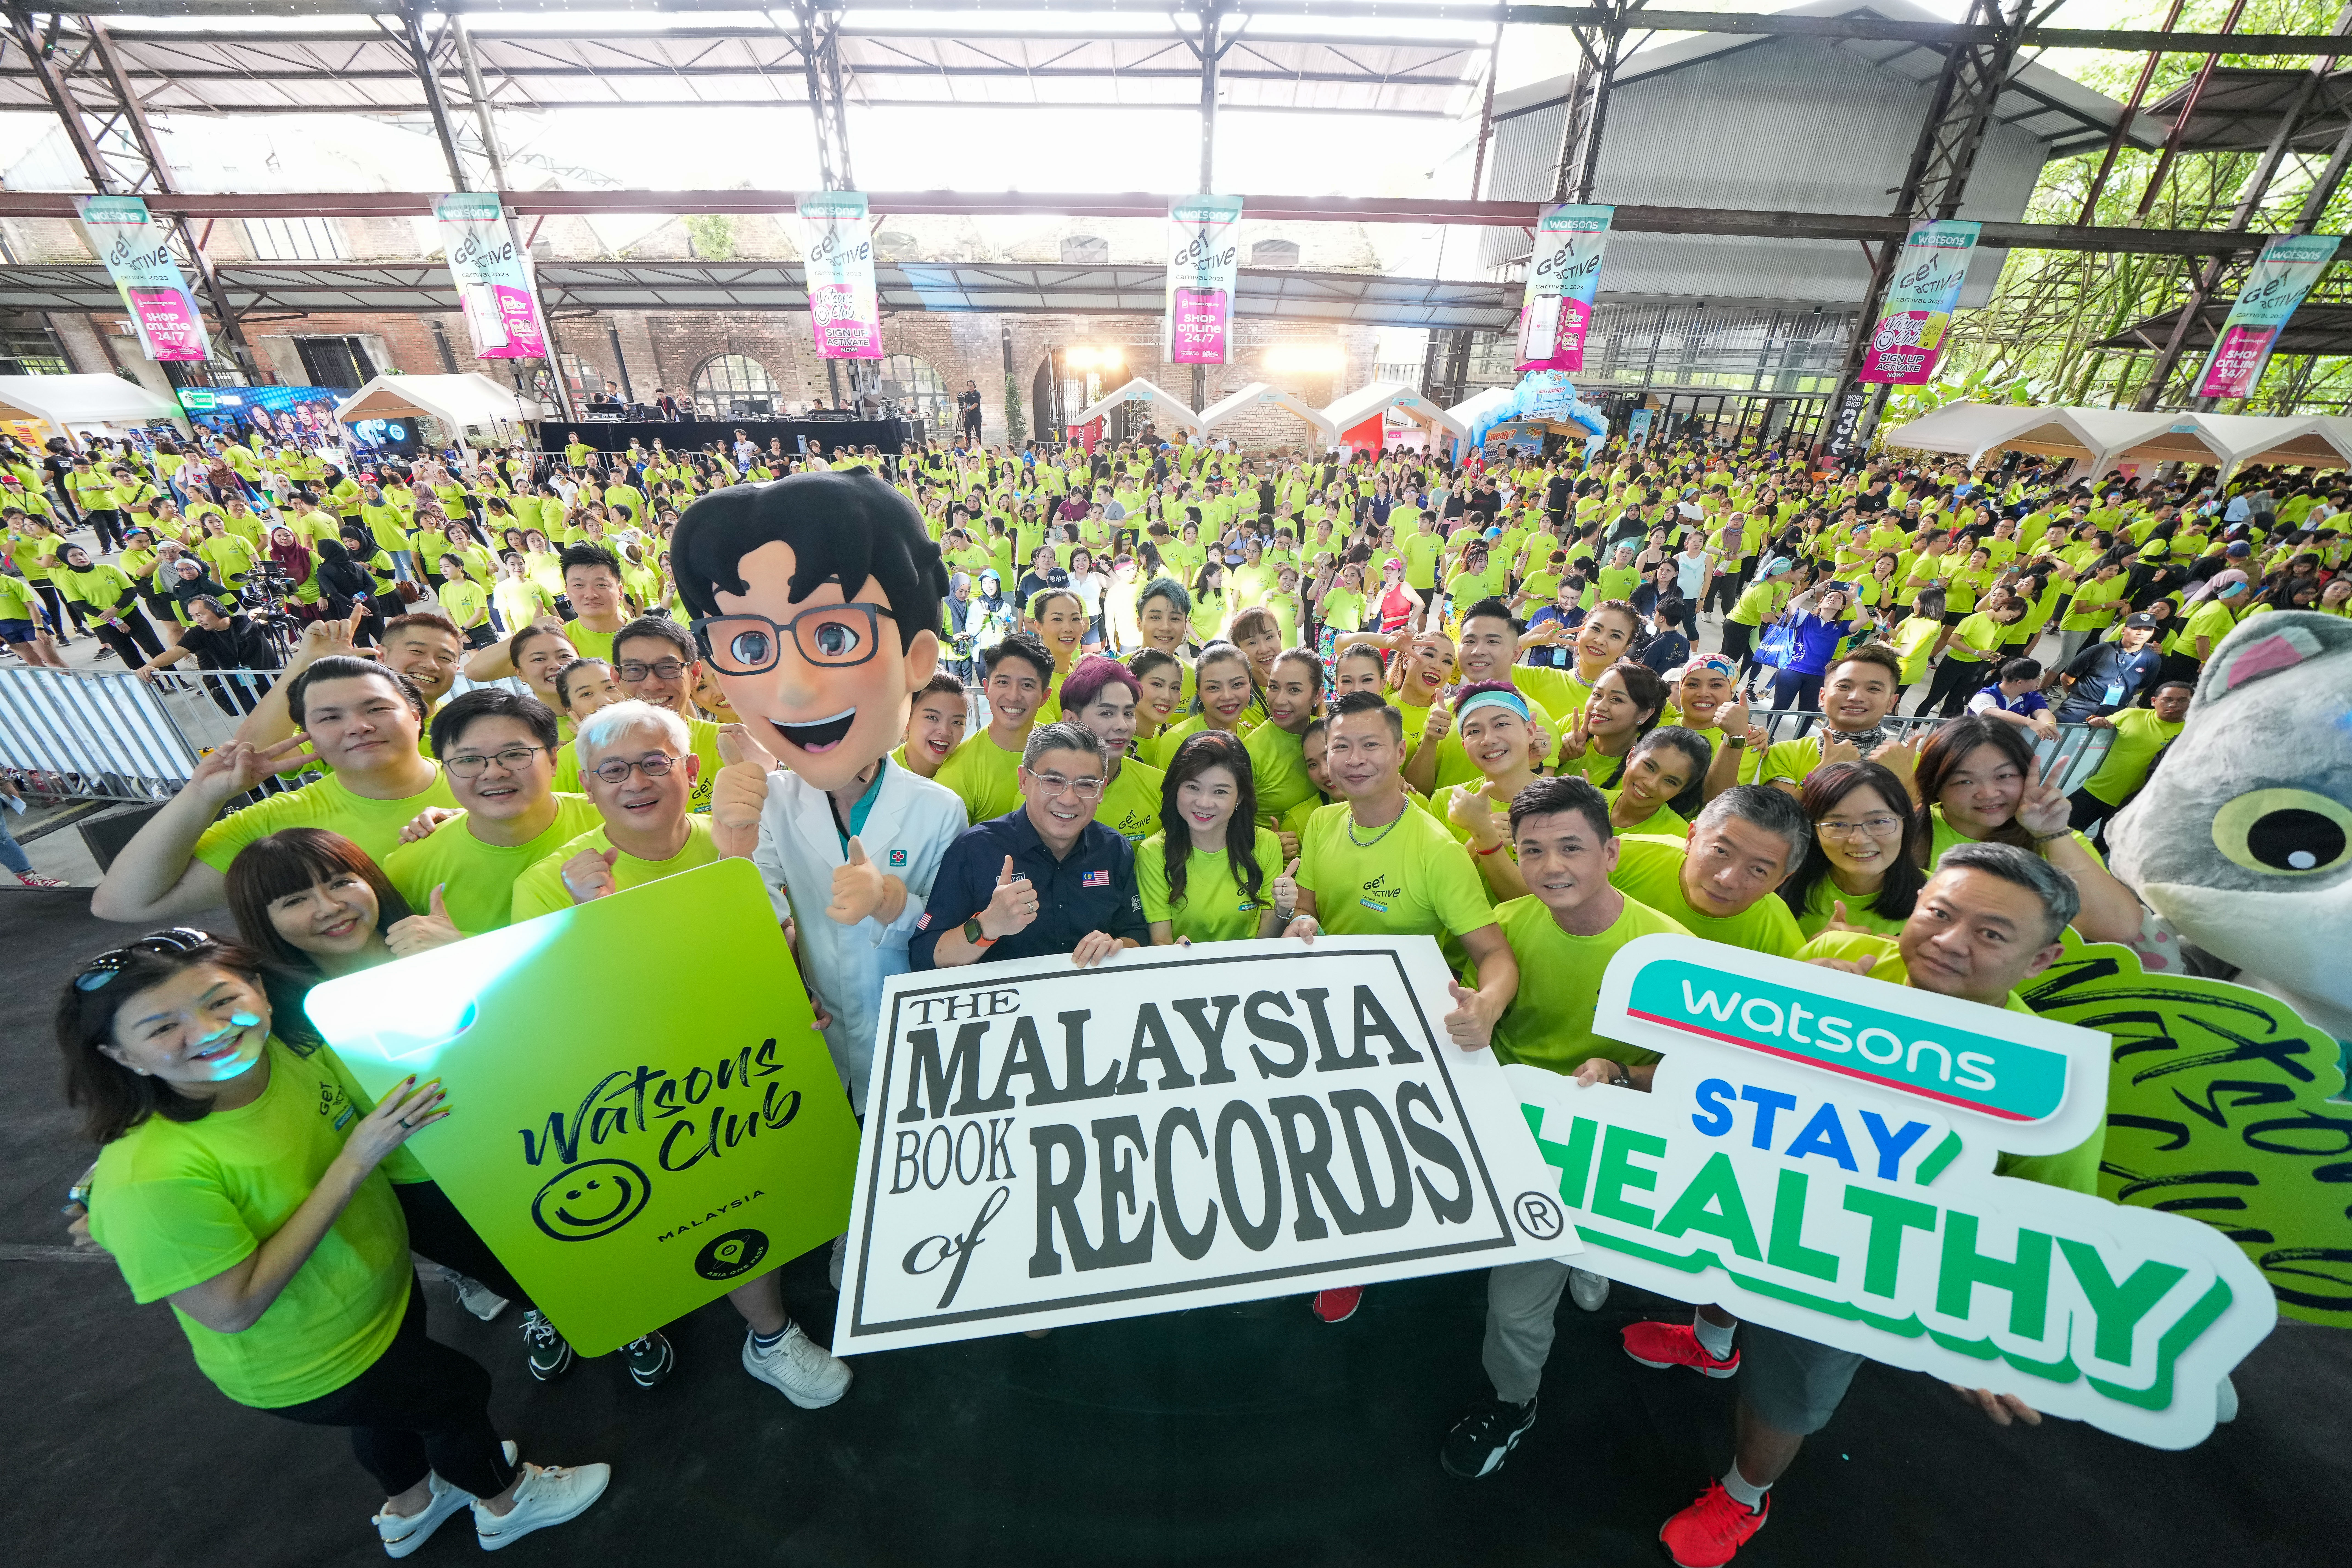 Watsons get active break malaysia's book record